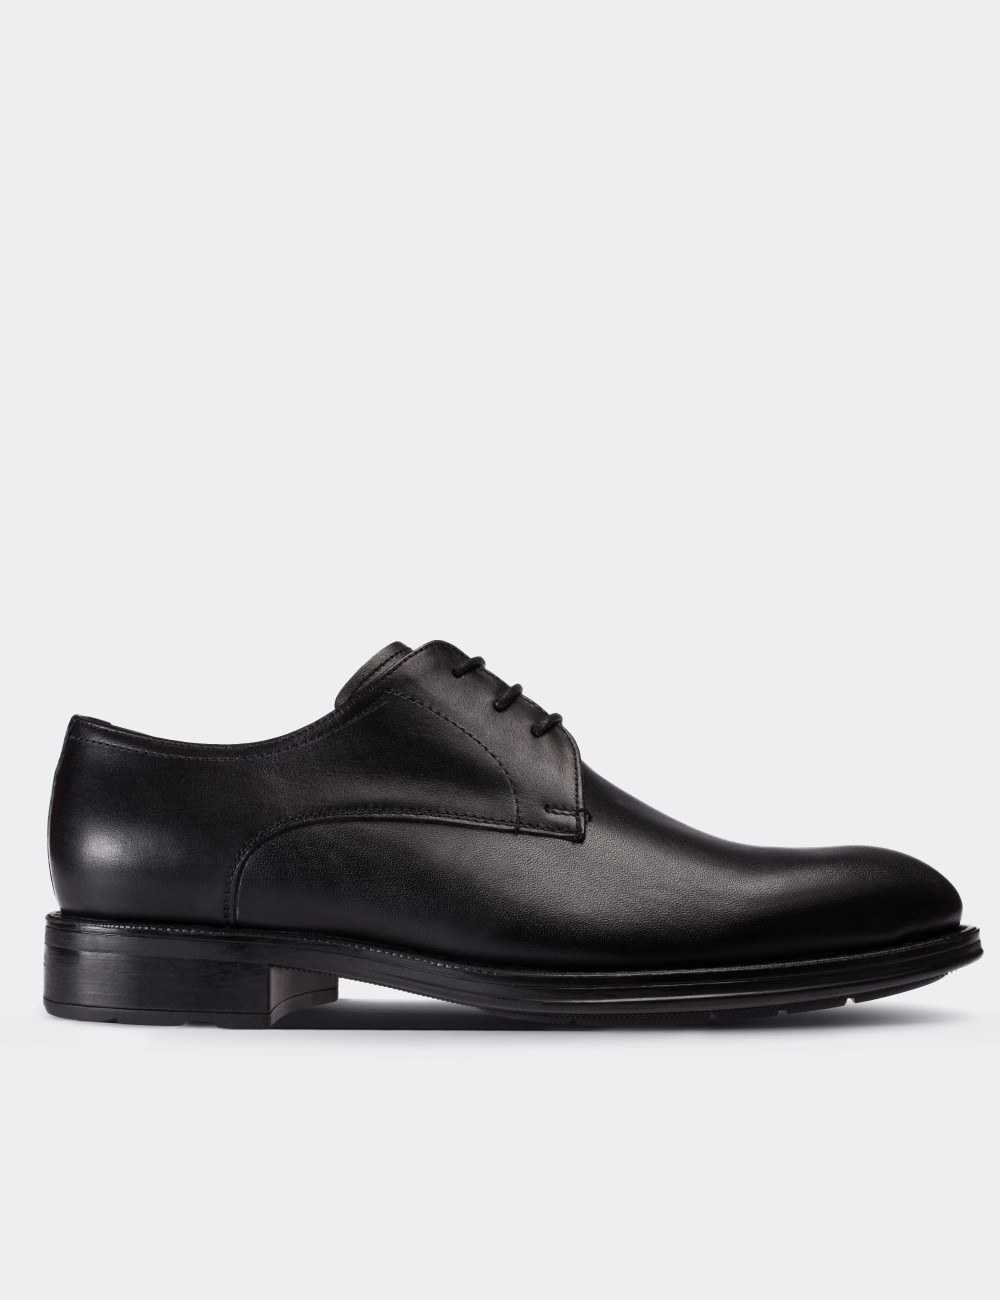 Black  Leather Classic Shoes - 00479MSYHC03